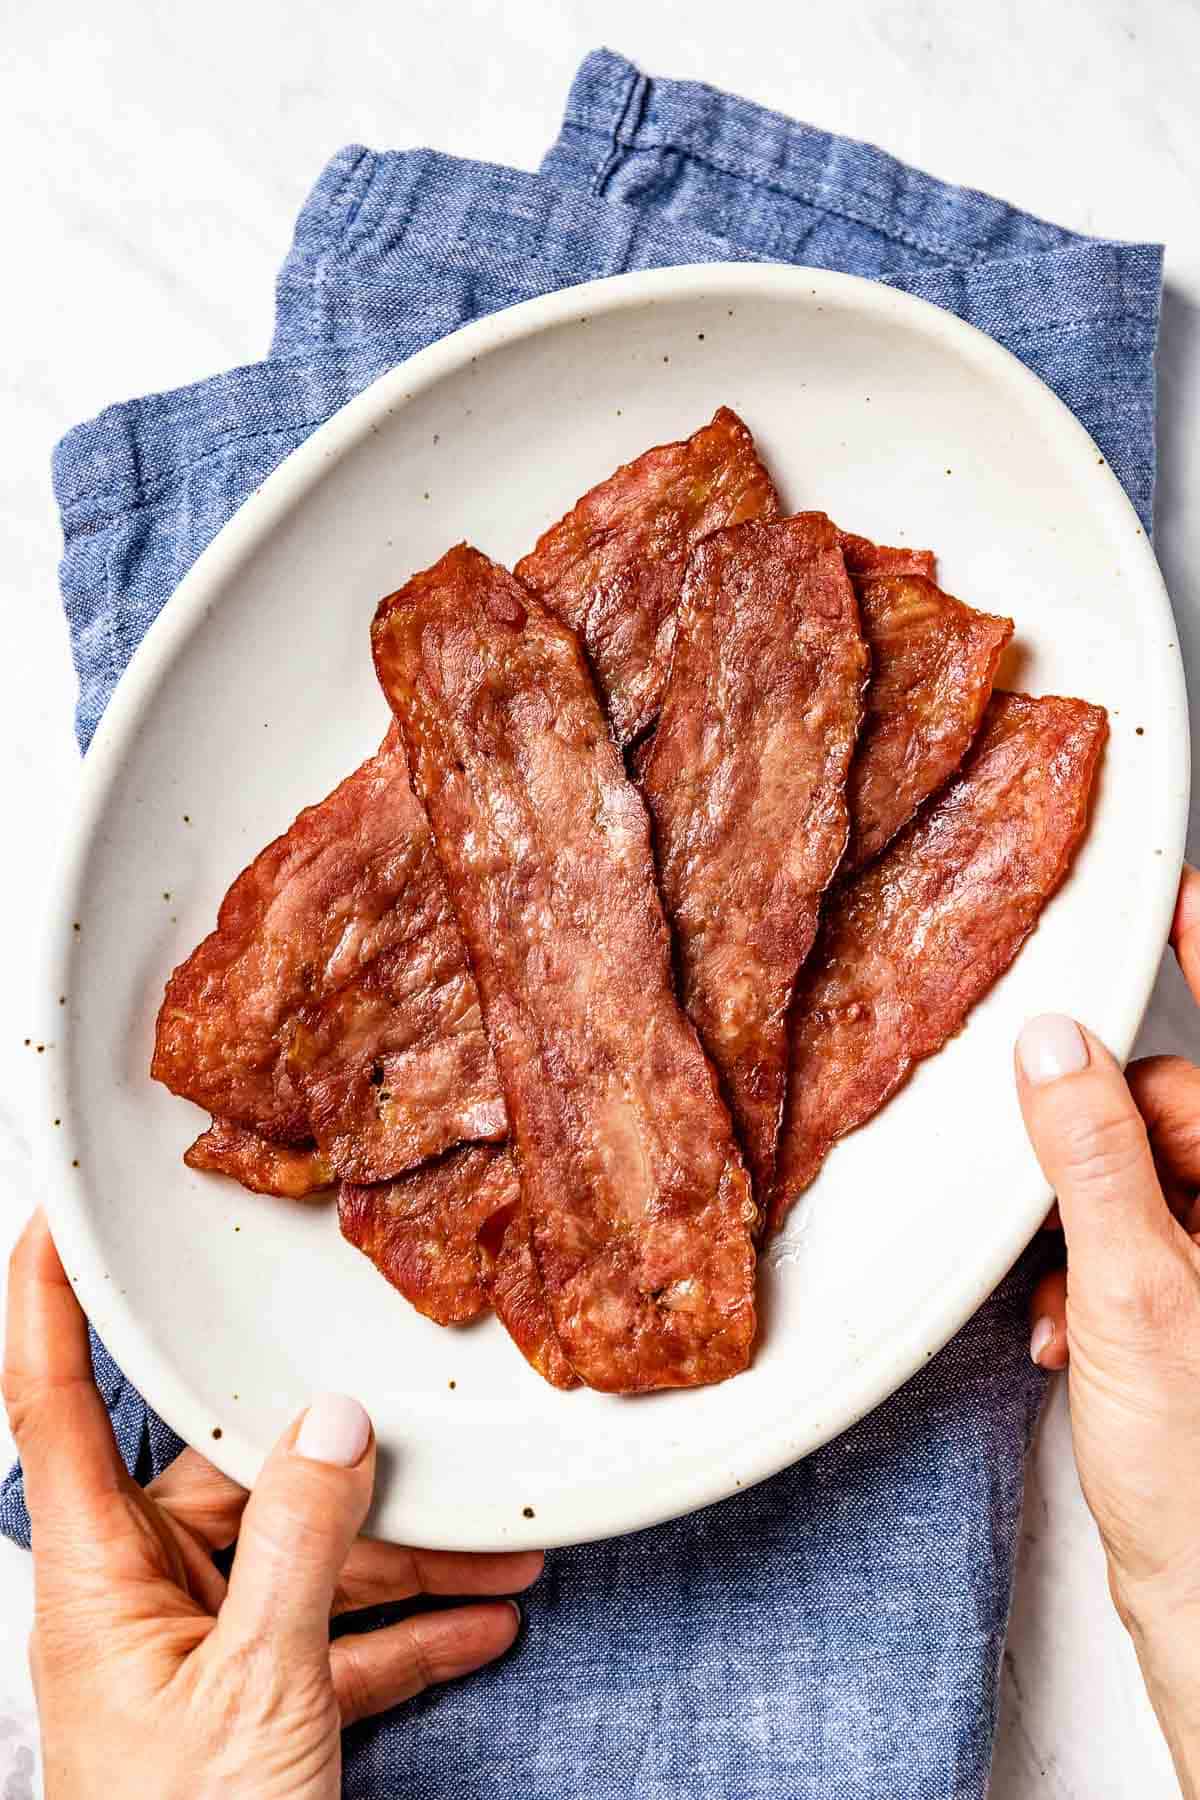 This Now-$17 Pan Is the 'Secret to Achieving Maximum Crispiness' on Bacon